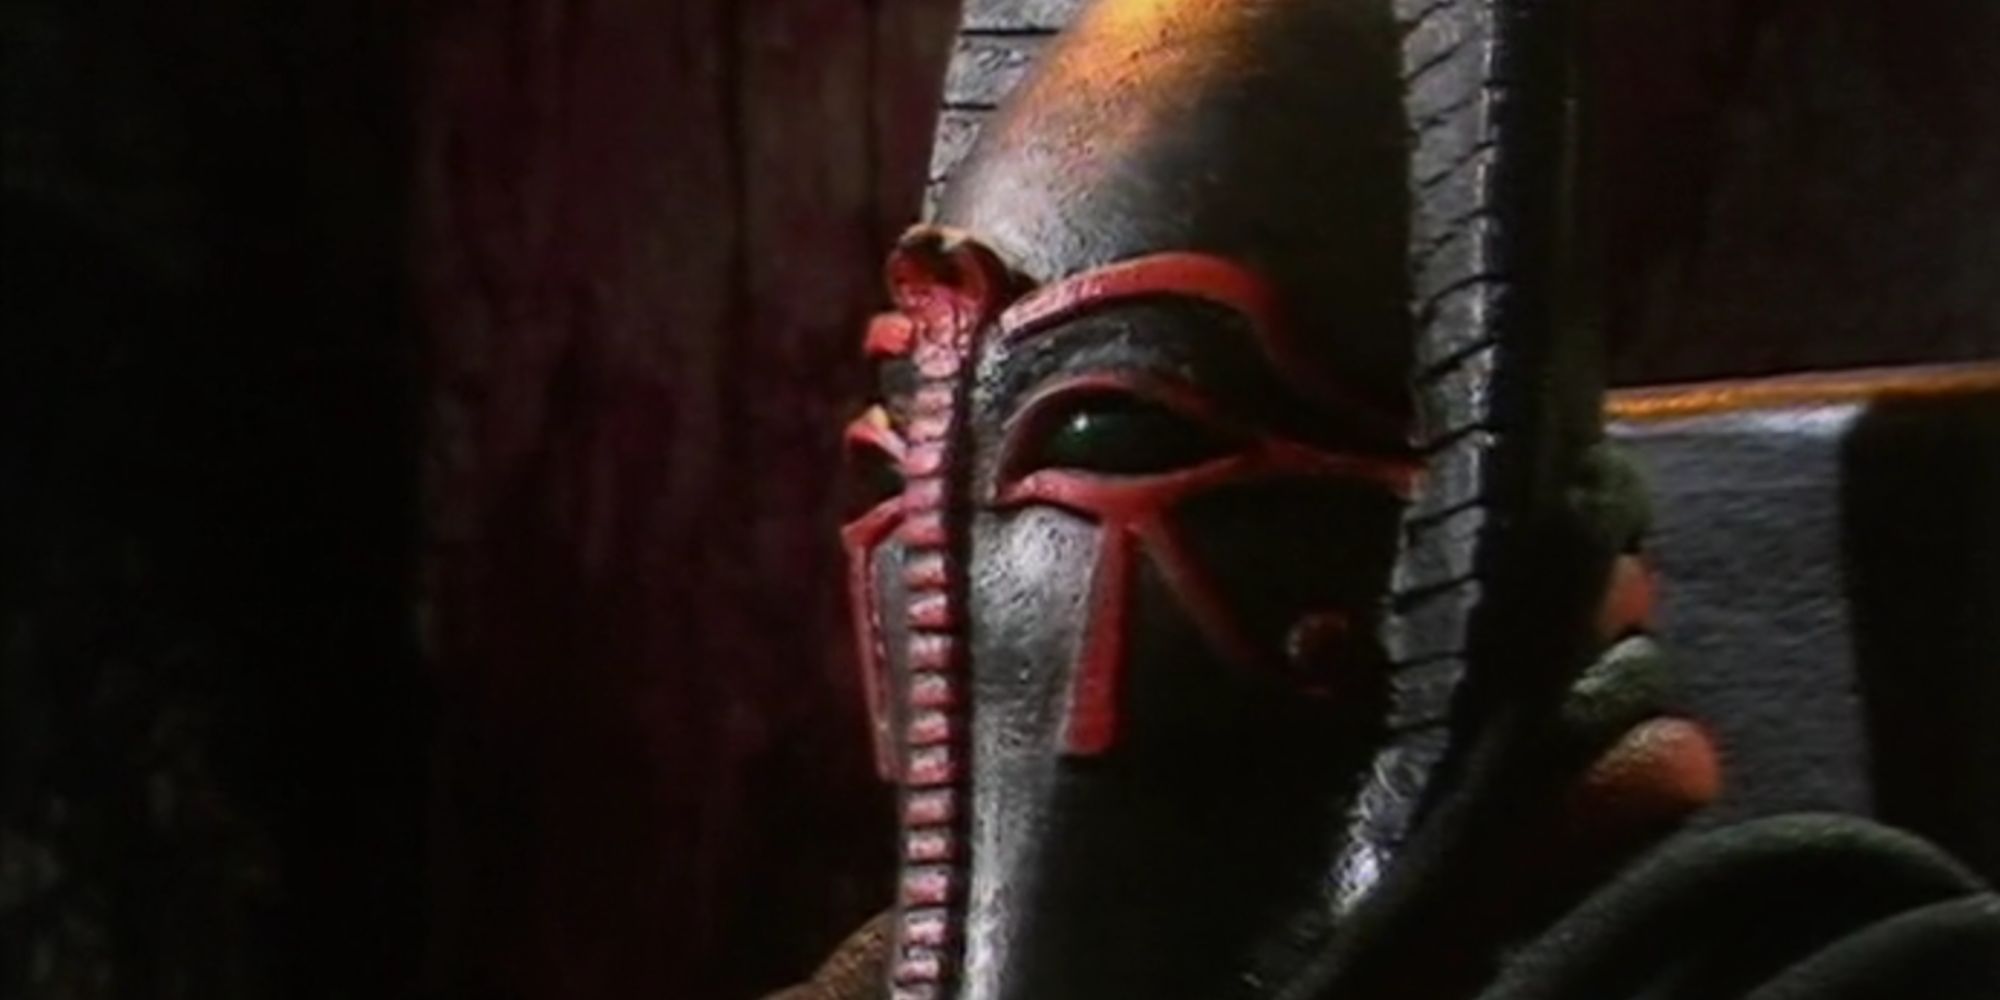 Sutekh wearing a mask in Doctor Who.